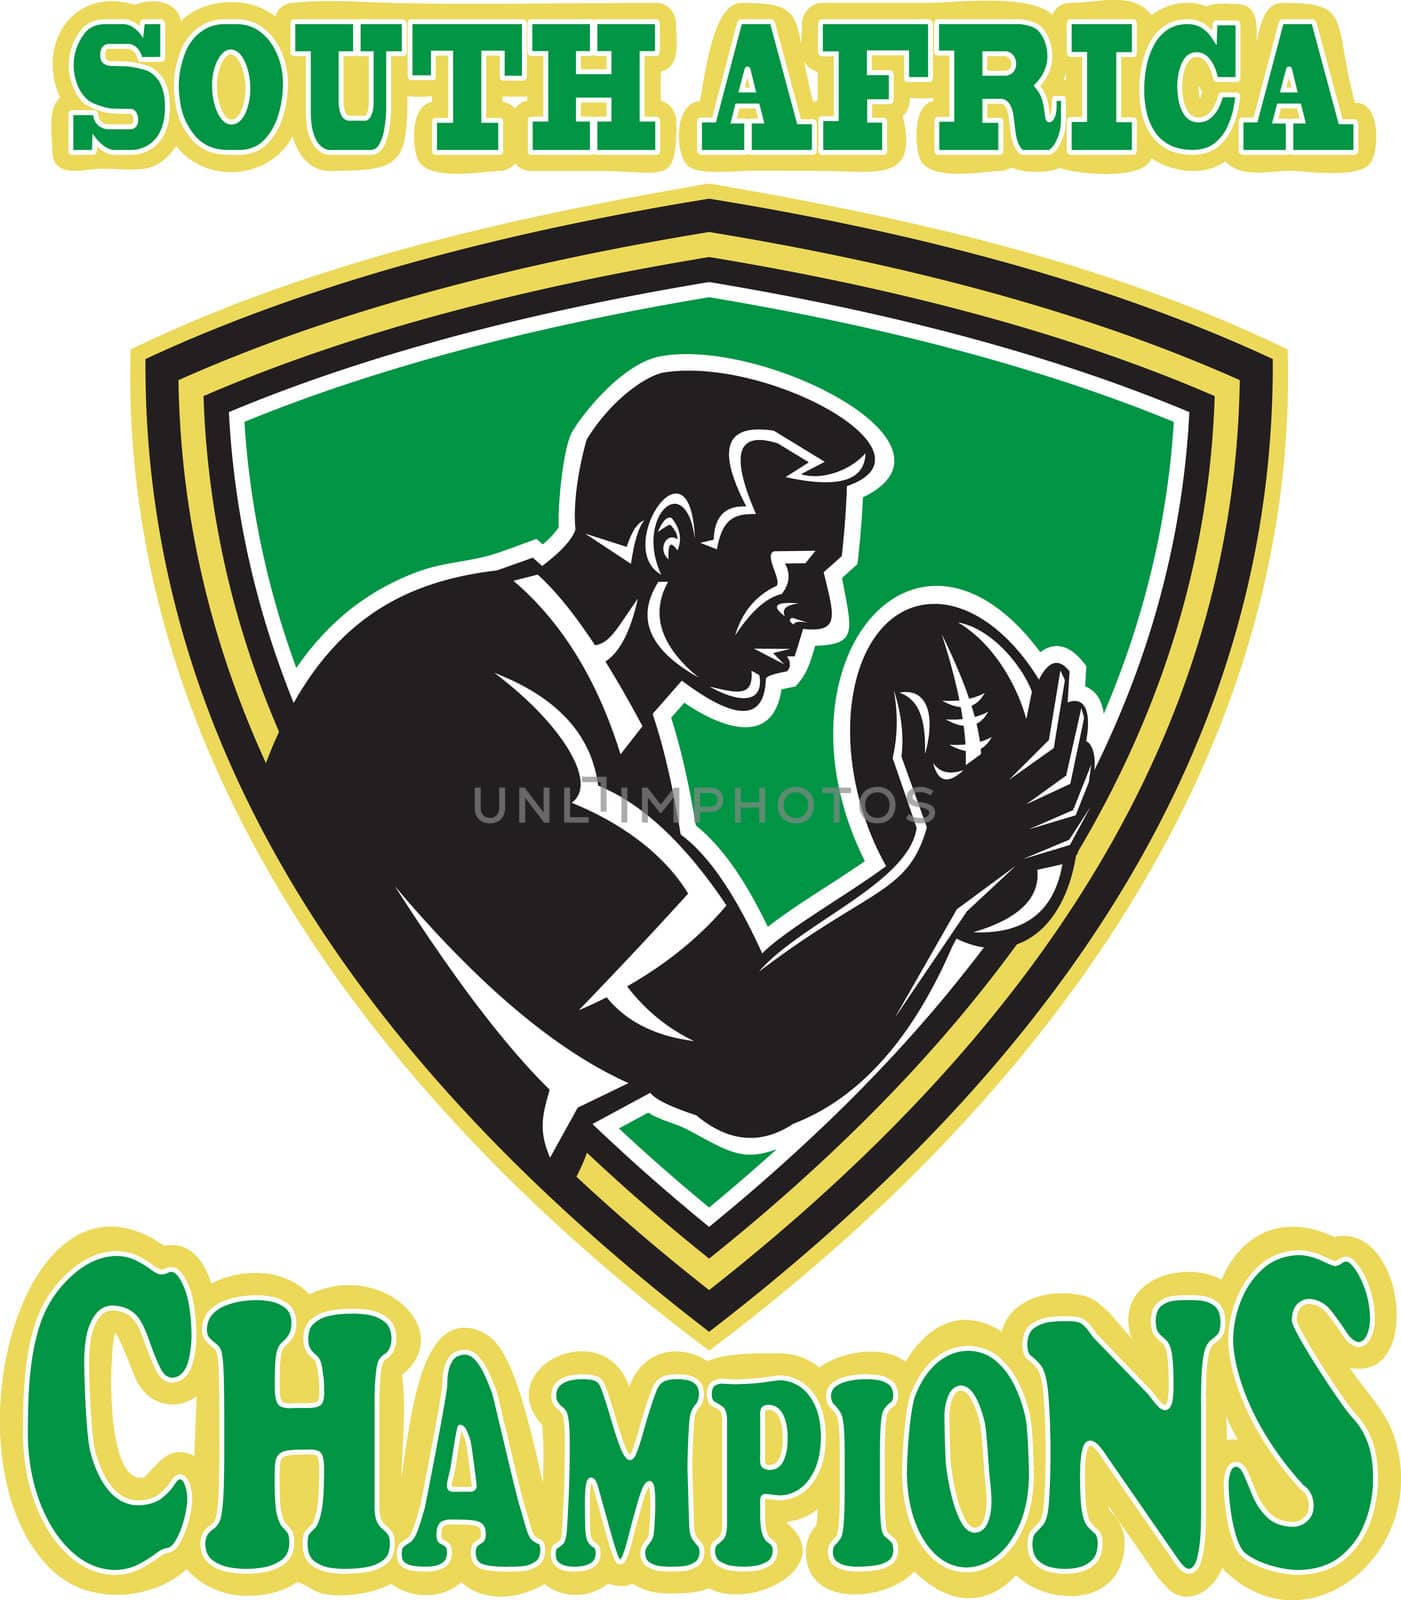 illustration of a rugby player with ball set inside shield done in retro style with words South Africa Champions